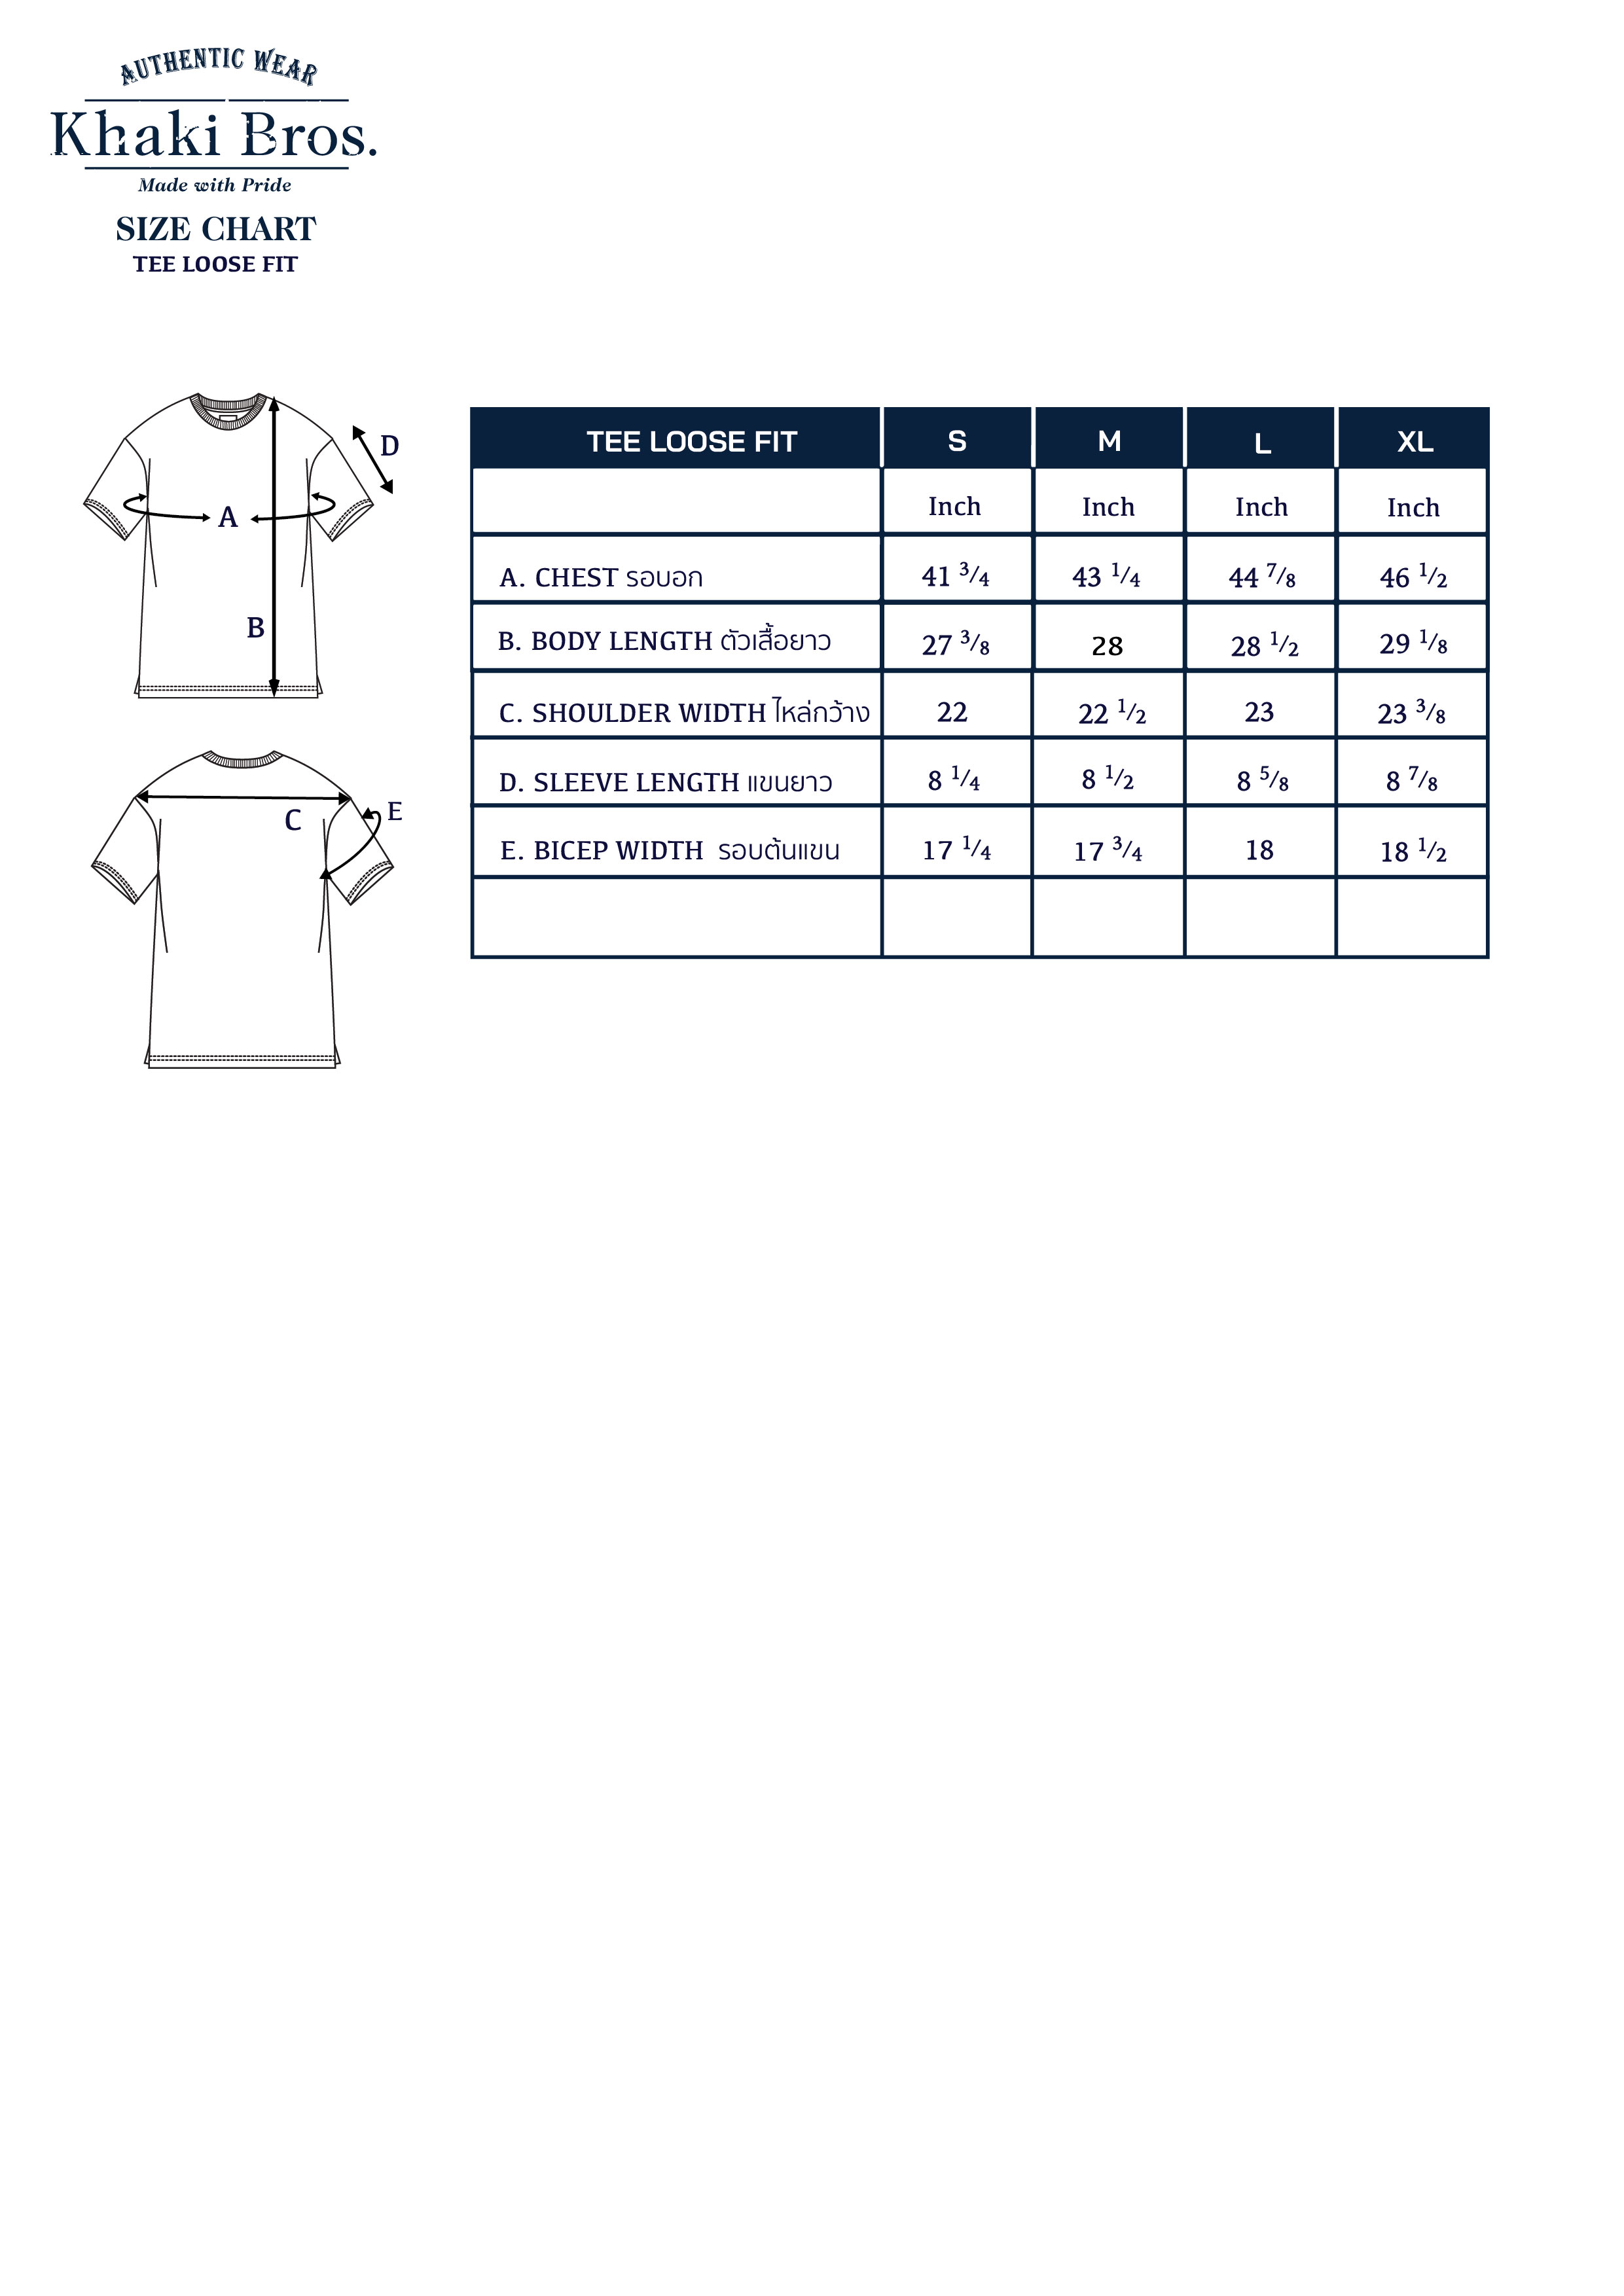 Tee_Loose_Fit_Size_Chart_2022_Update-15